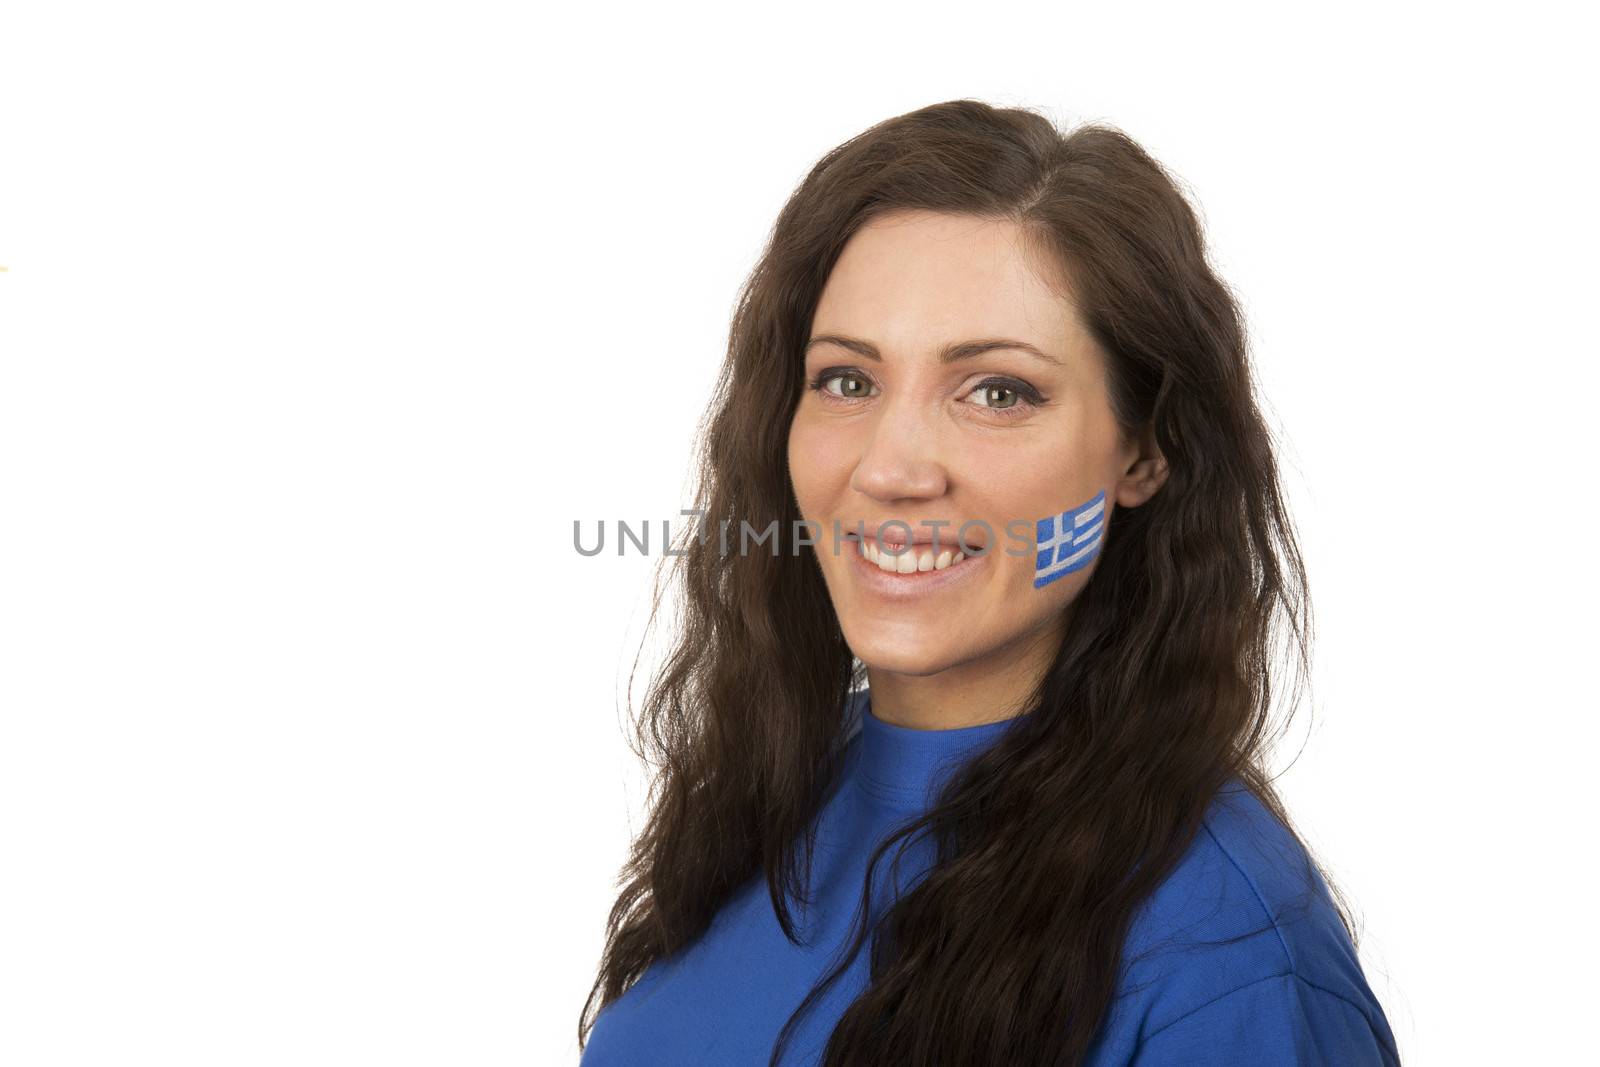 Young Girl with the Greece flag painted in her face